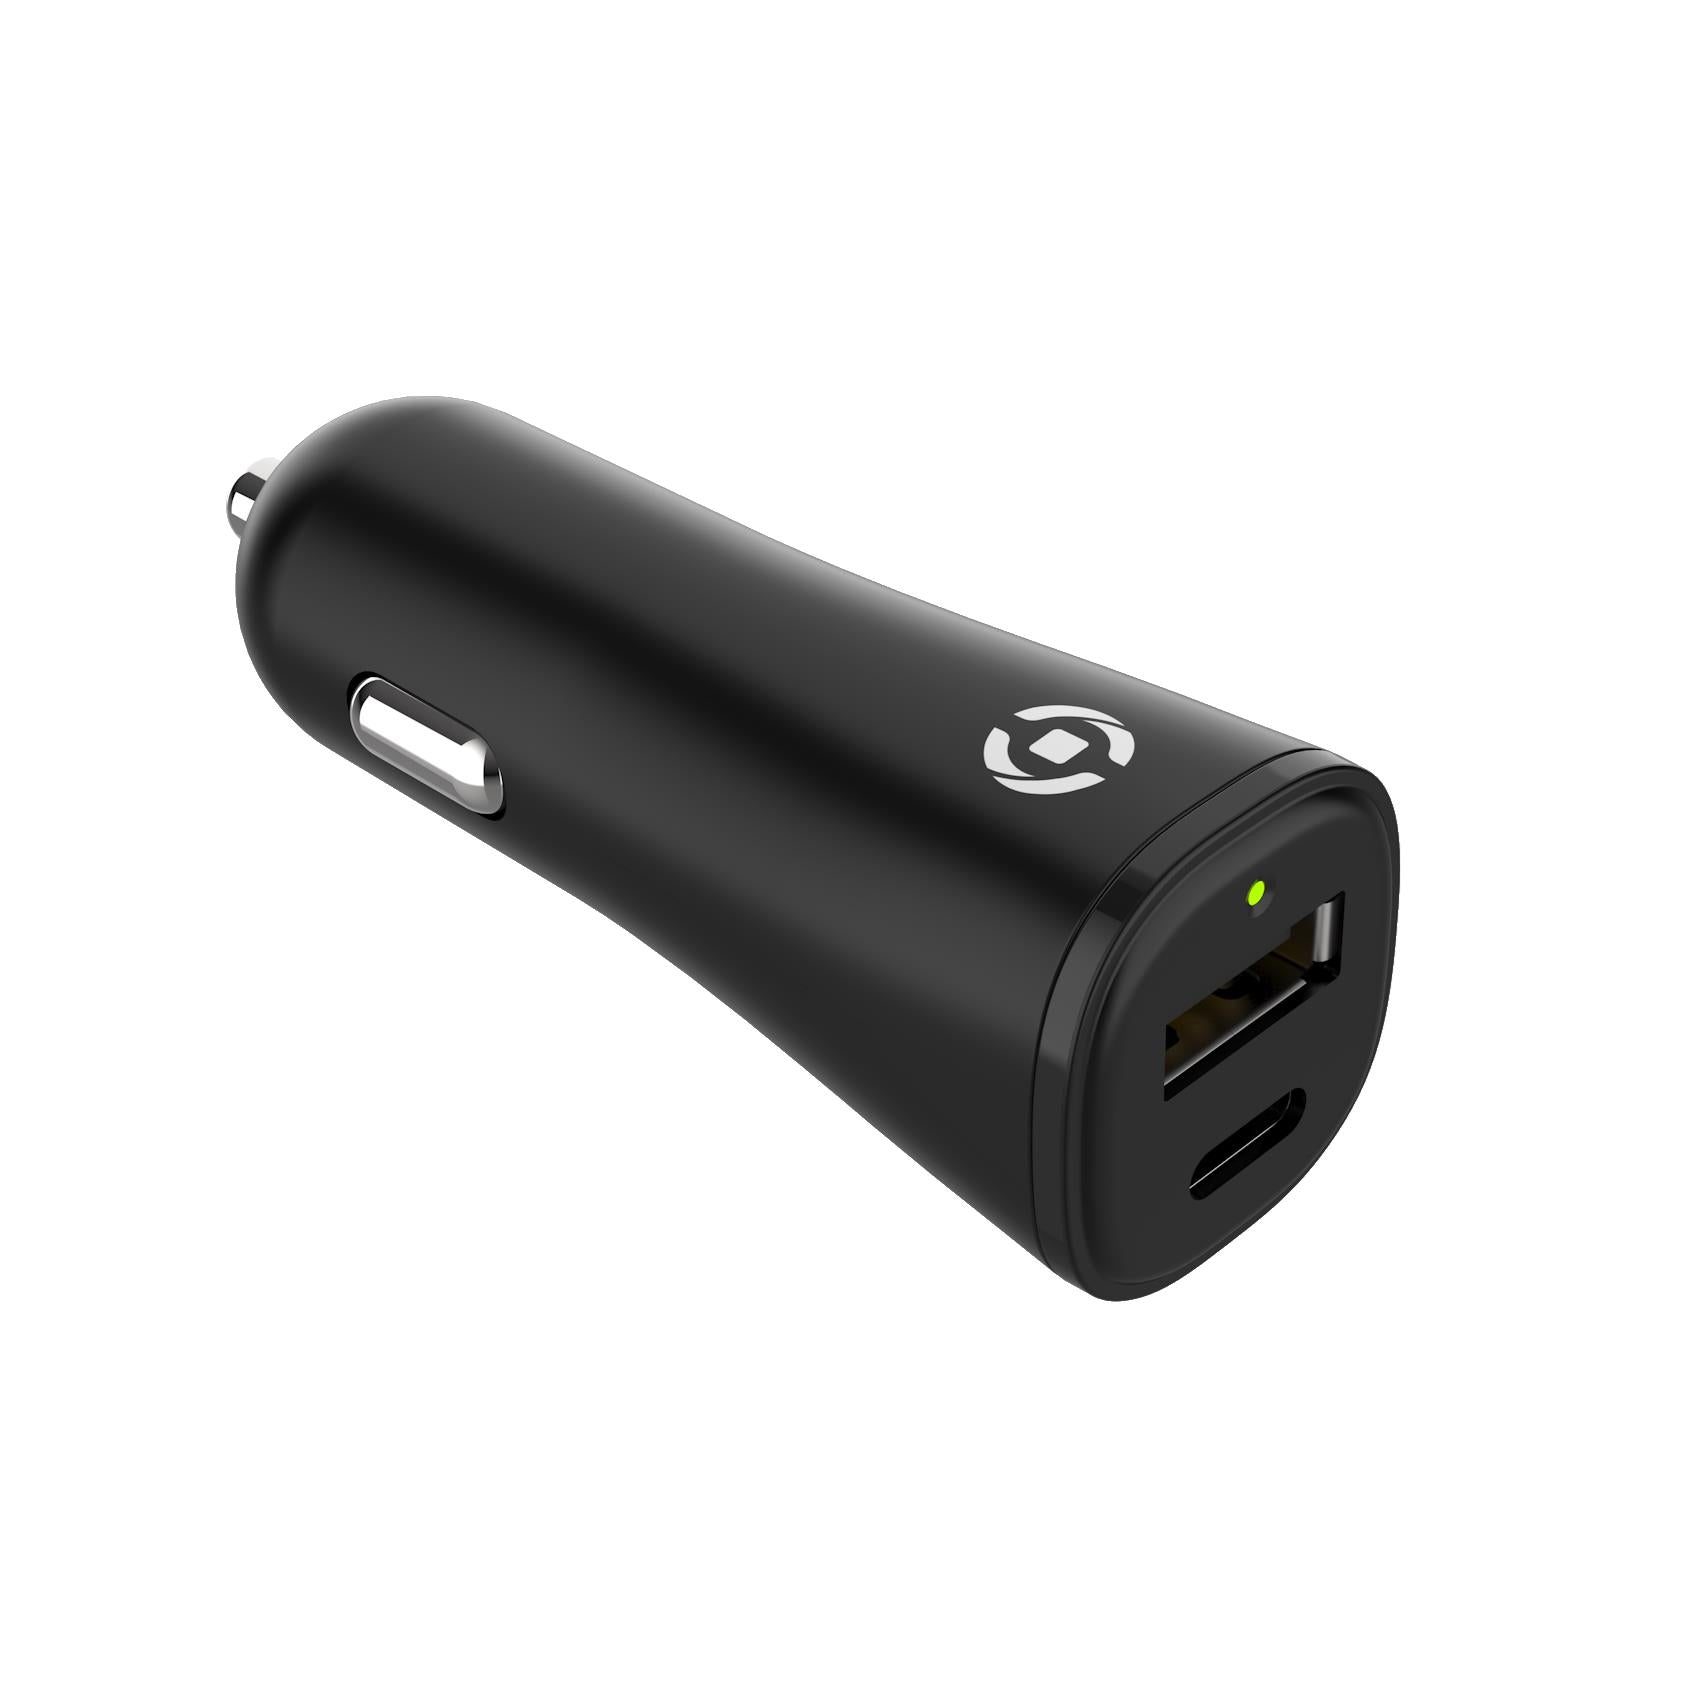 Celly GRSCCUSBUSBCBK - Car charger with 2 output ports made with 100% recycled plastic